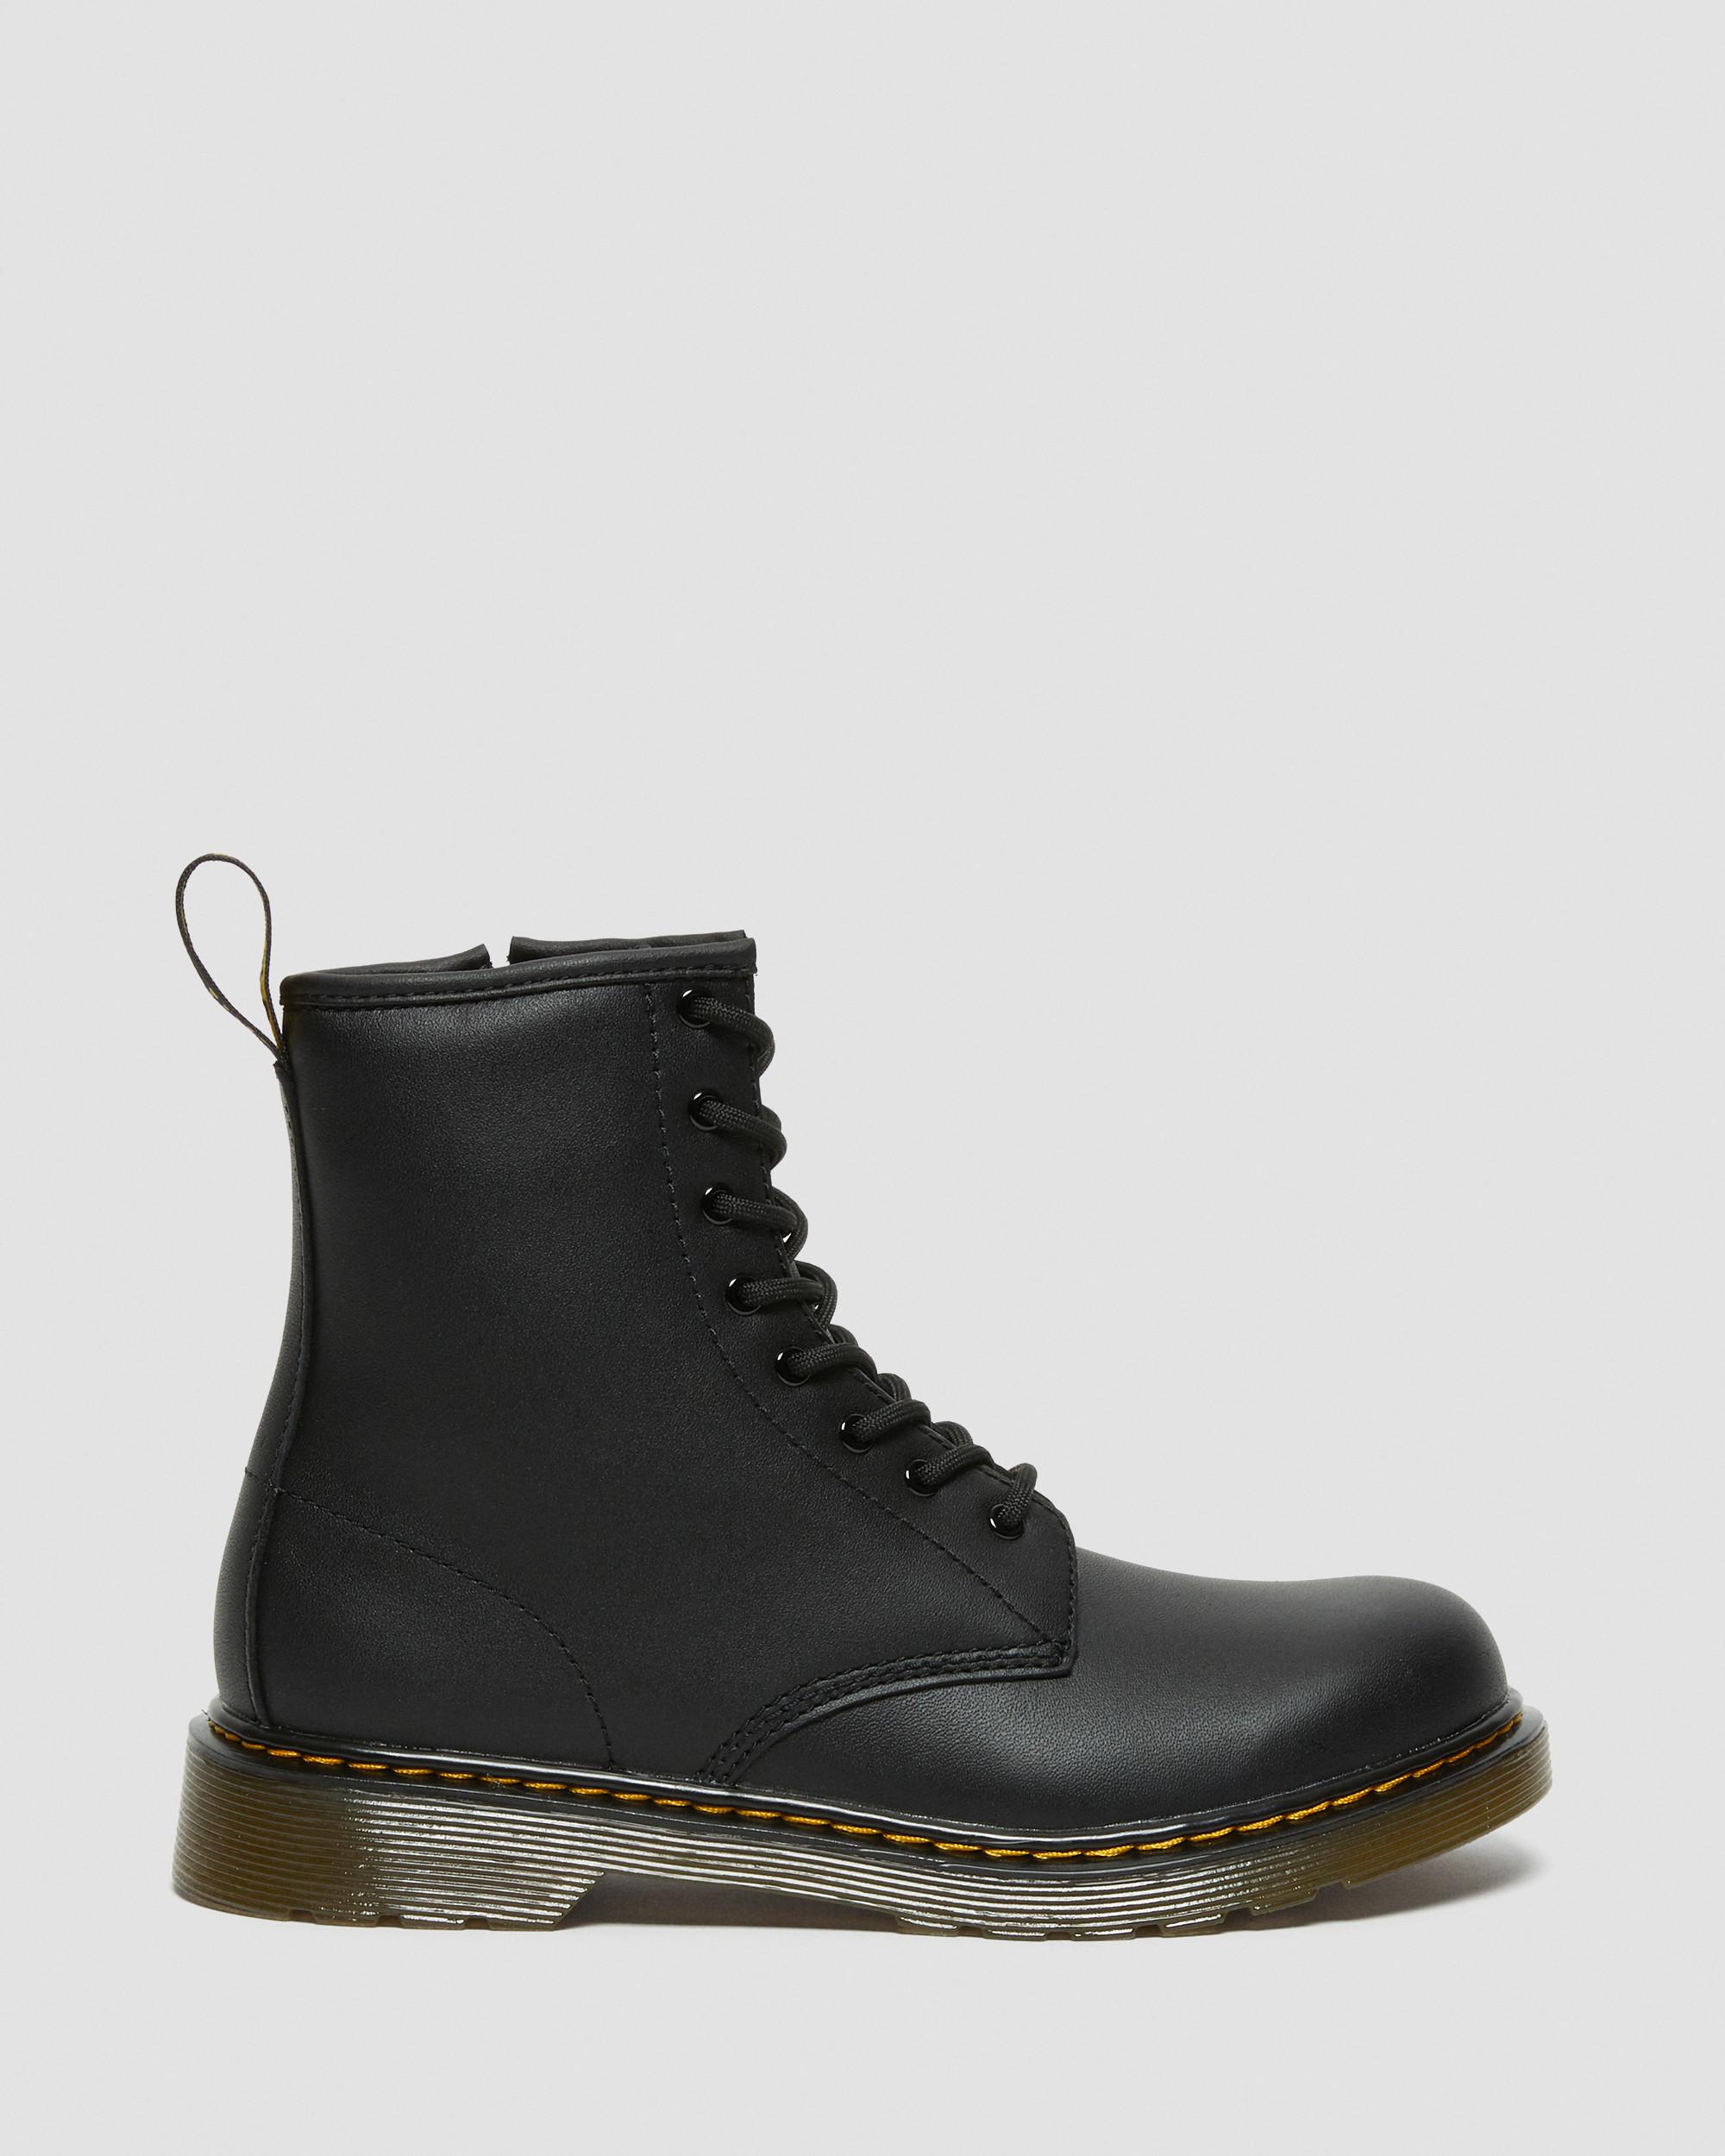 Softy Leather Dr. 1460 T Lace in Up Black Martens Boots Youth |